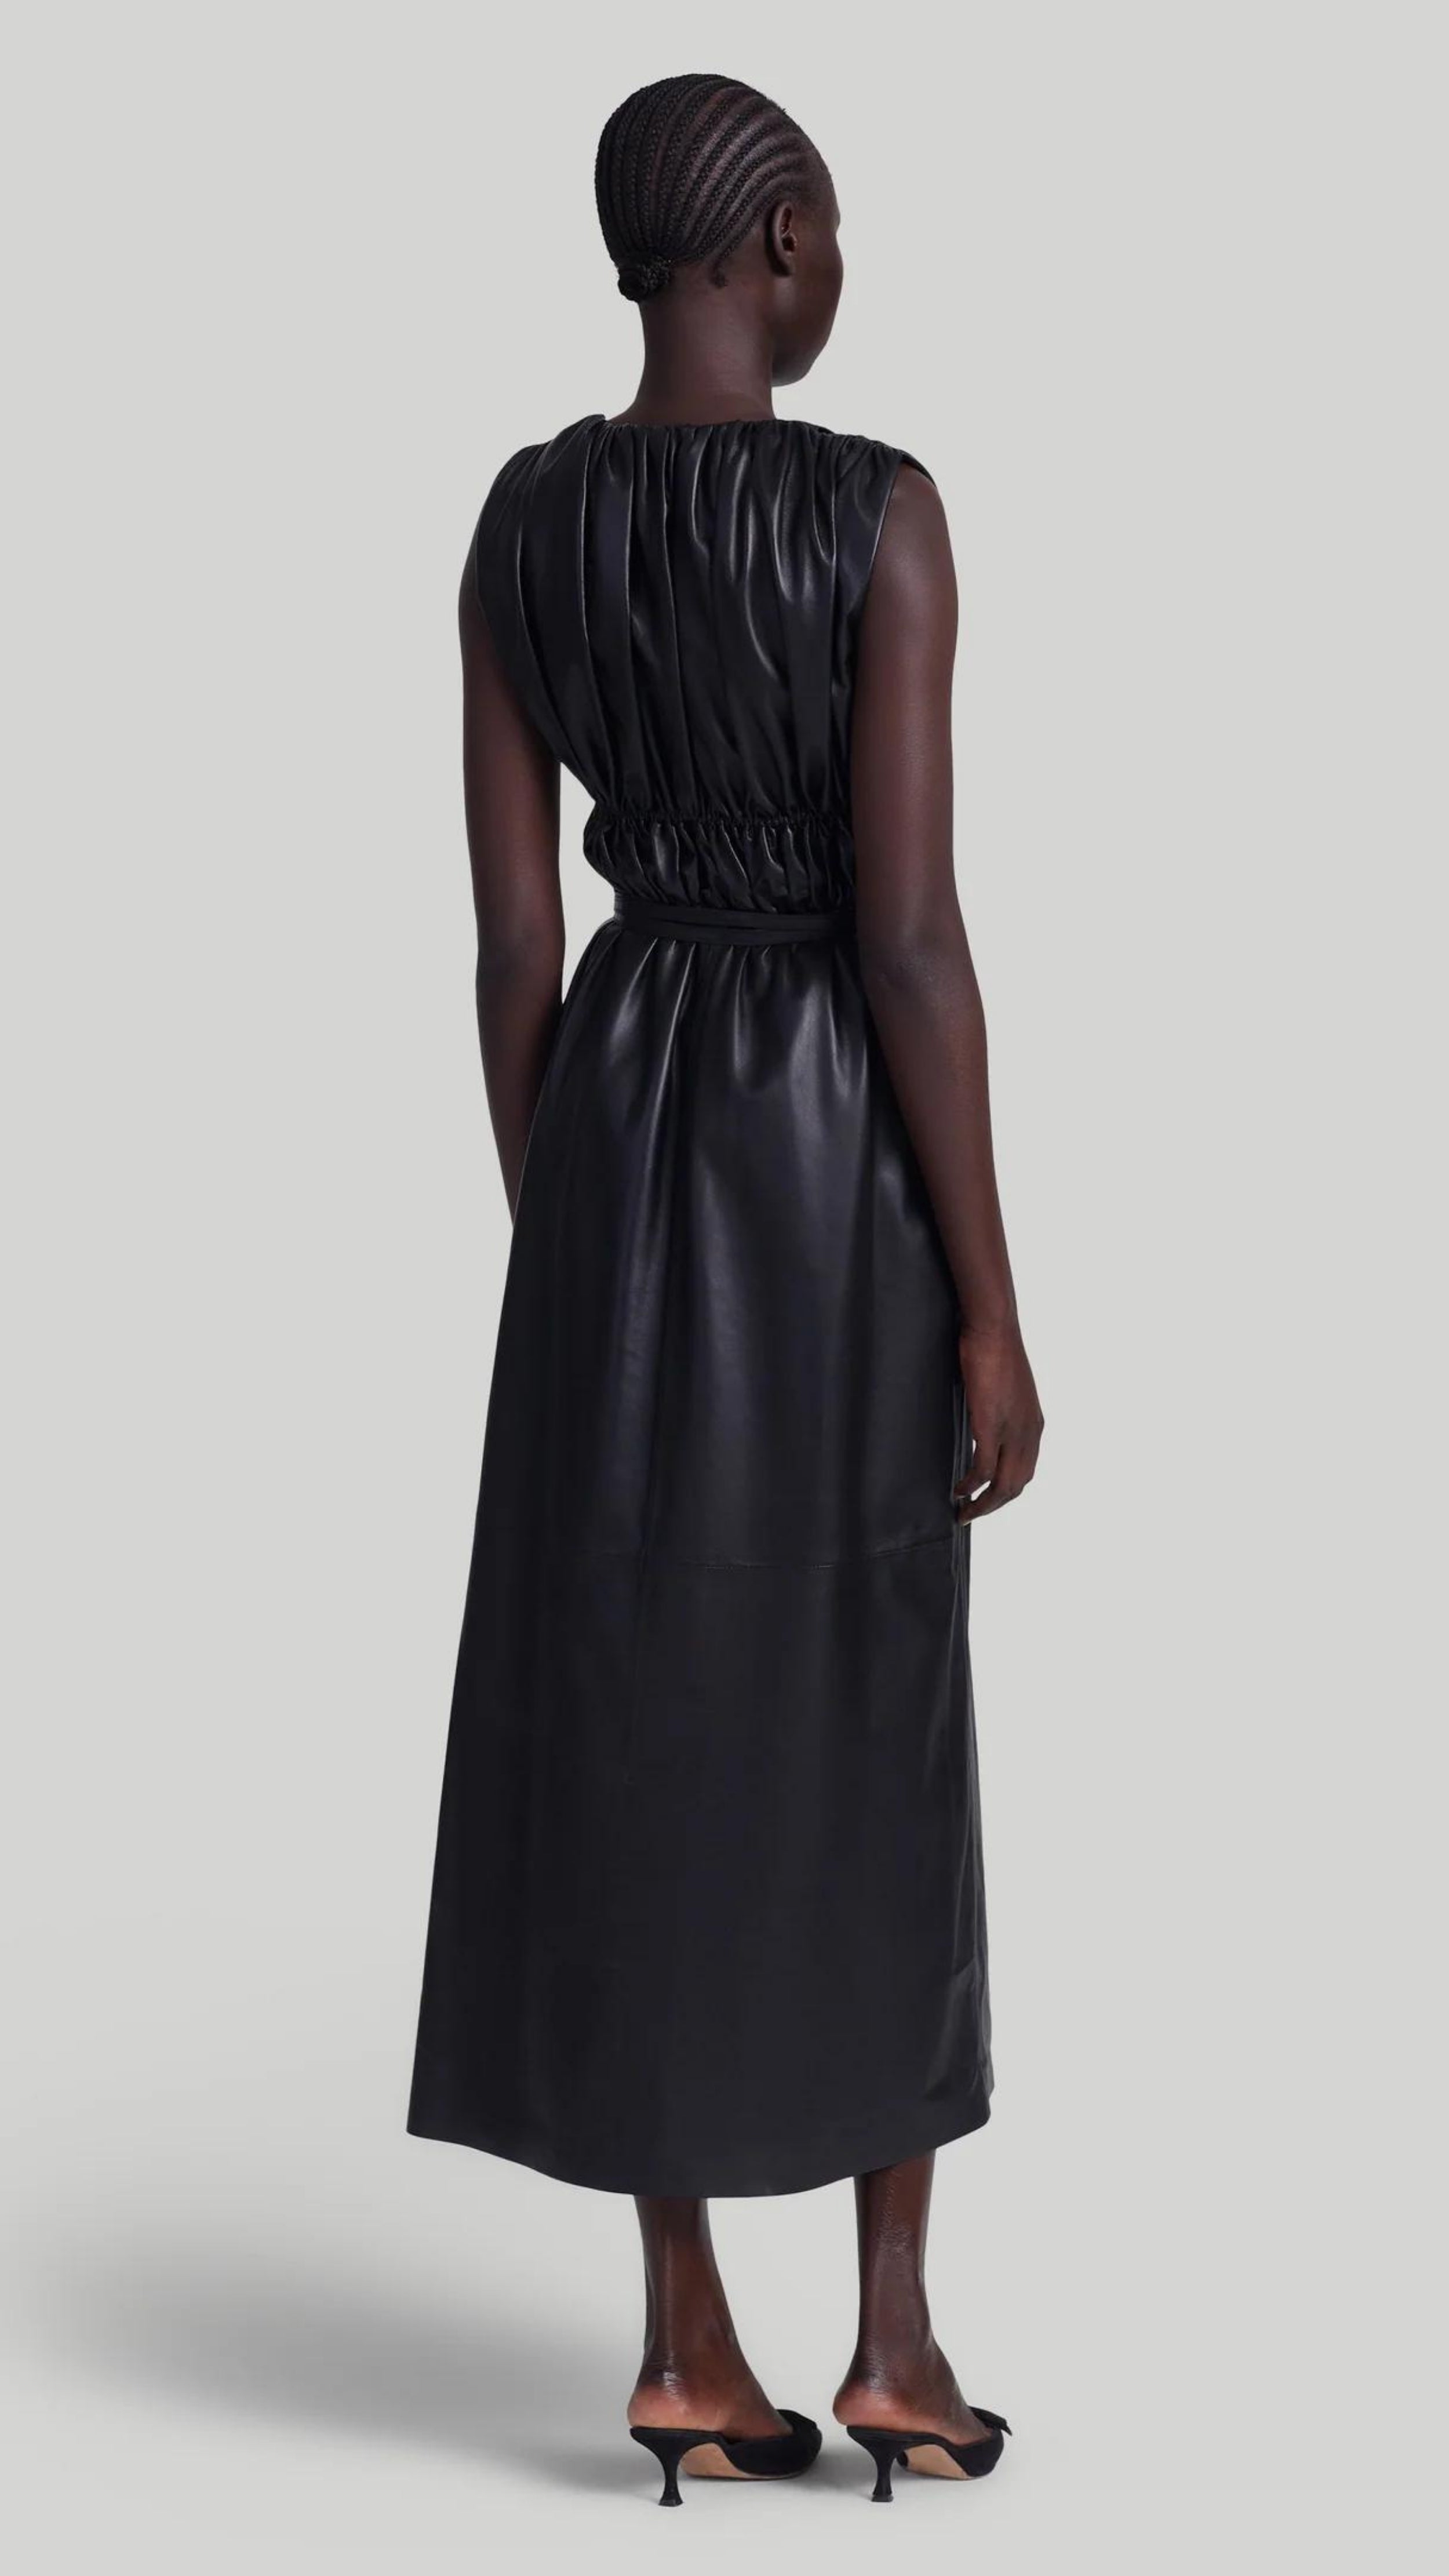 Altuzarra Fiona Dress, made from soft lamb leather. It features a maxi silhouette with a low V-neck, sleeveless, and ruching that folds at the waist with a thin leather belt. Shown on model facing back.